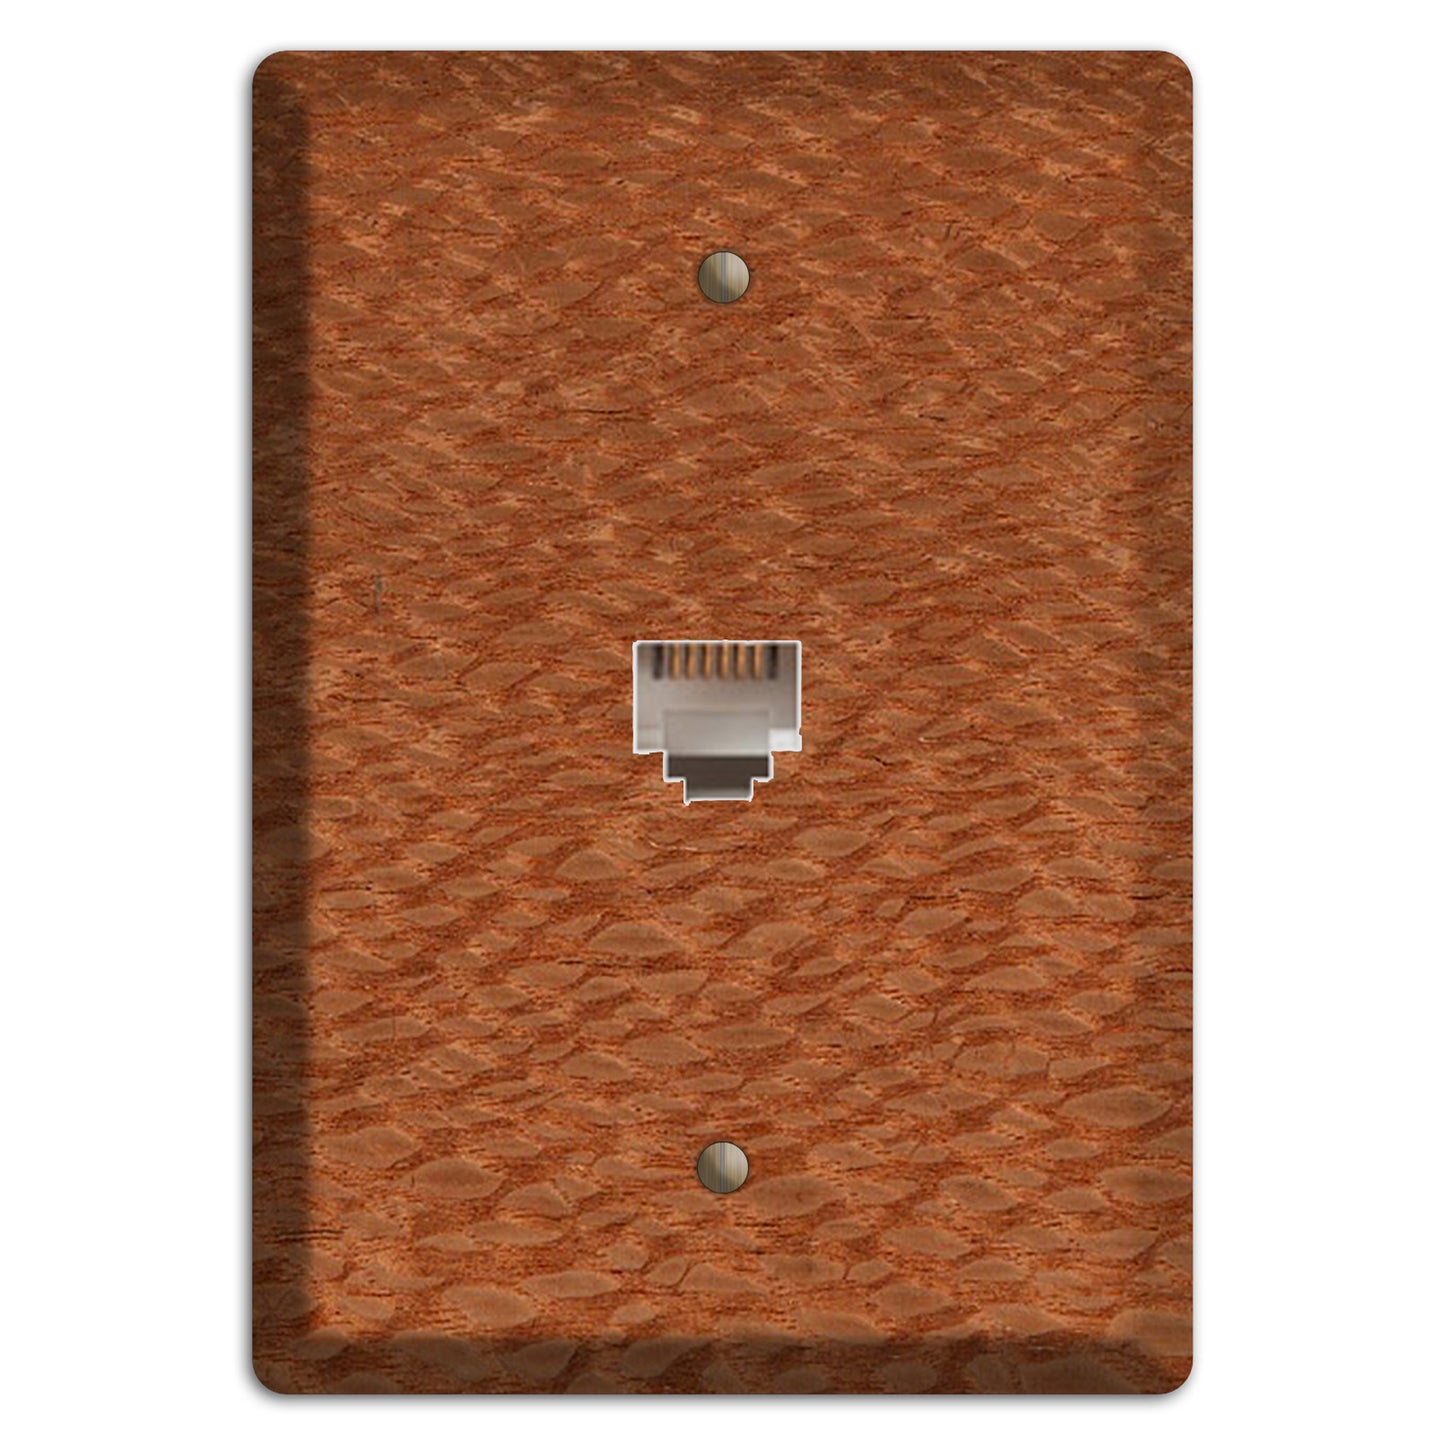 Lacewood Wood Duplex Outlet / Receptacle Cover Plate